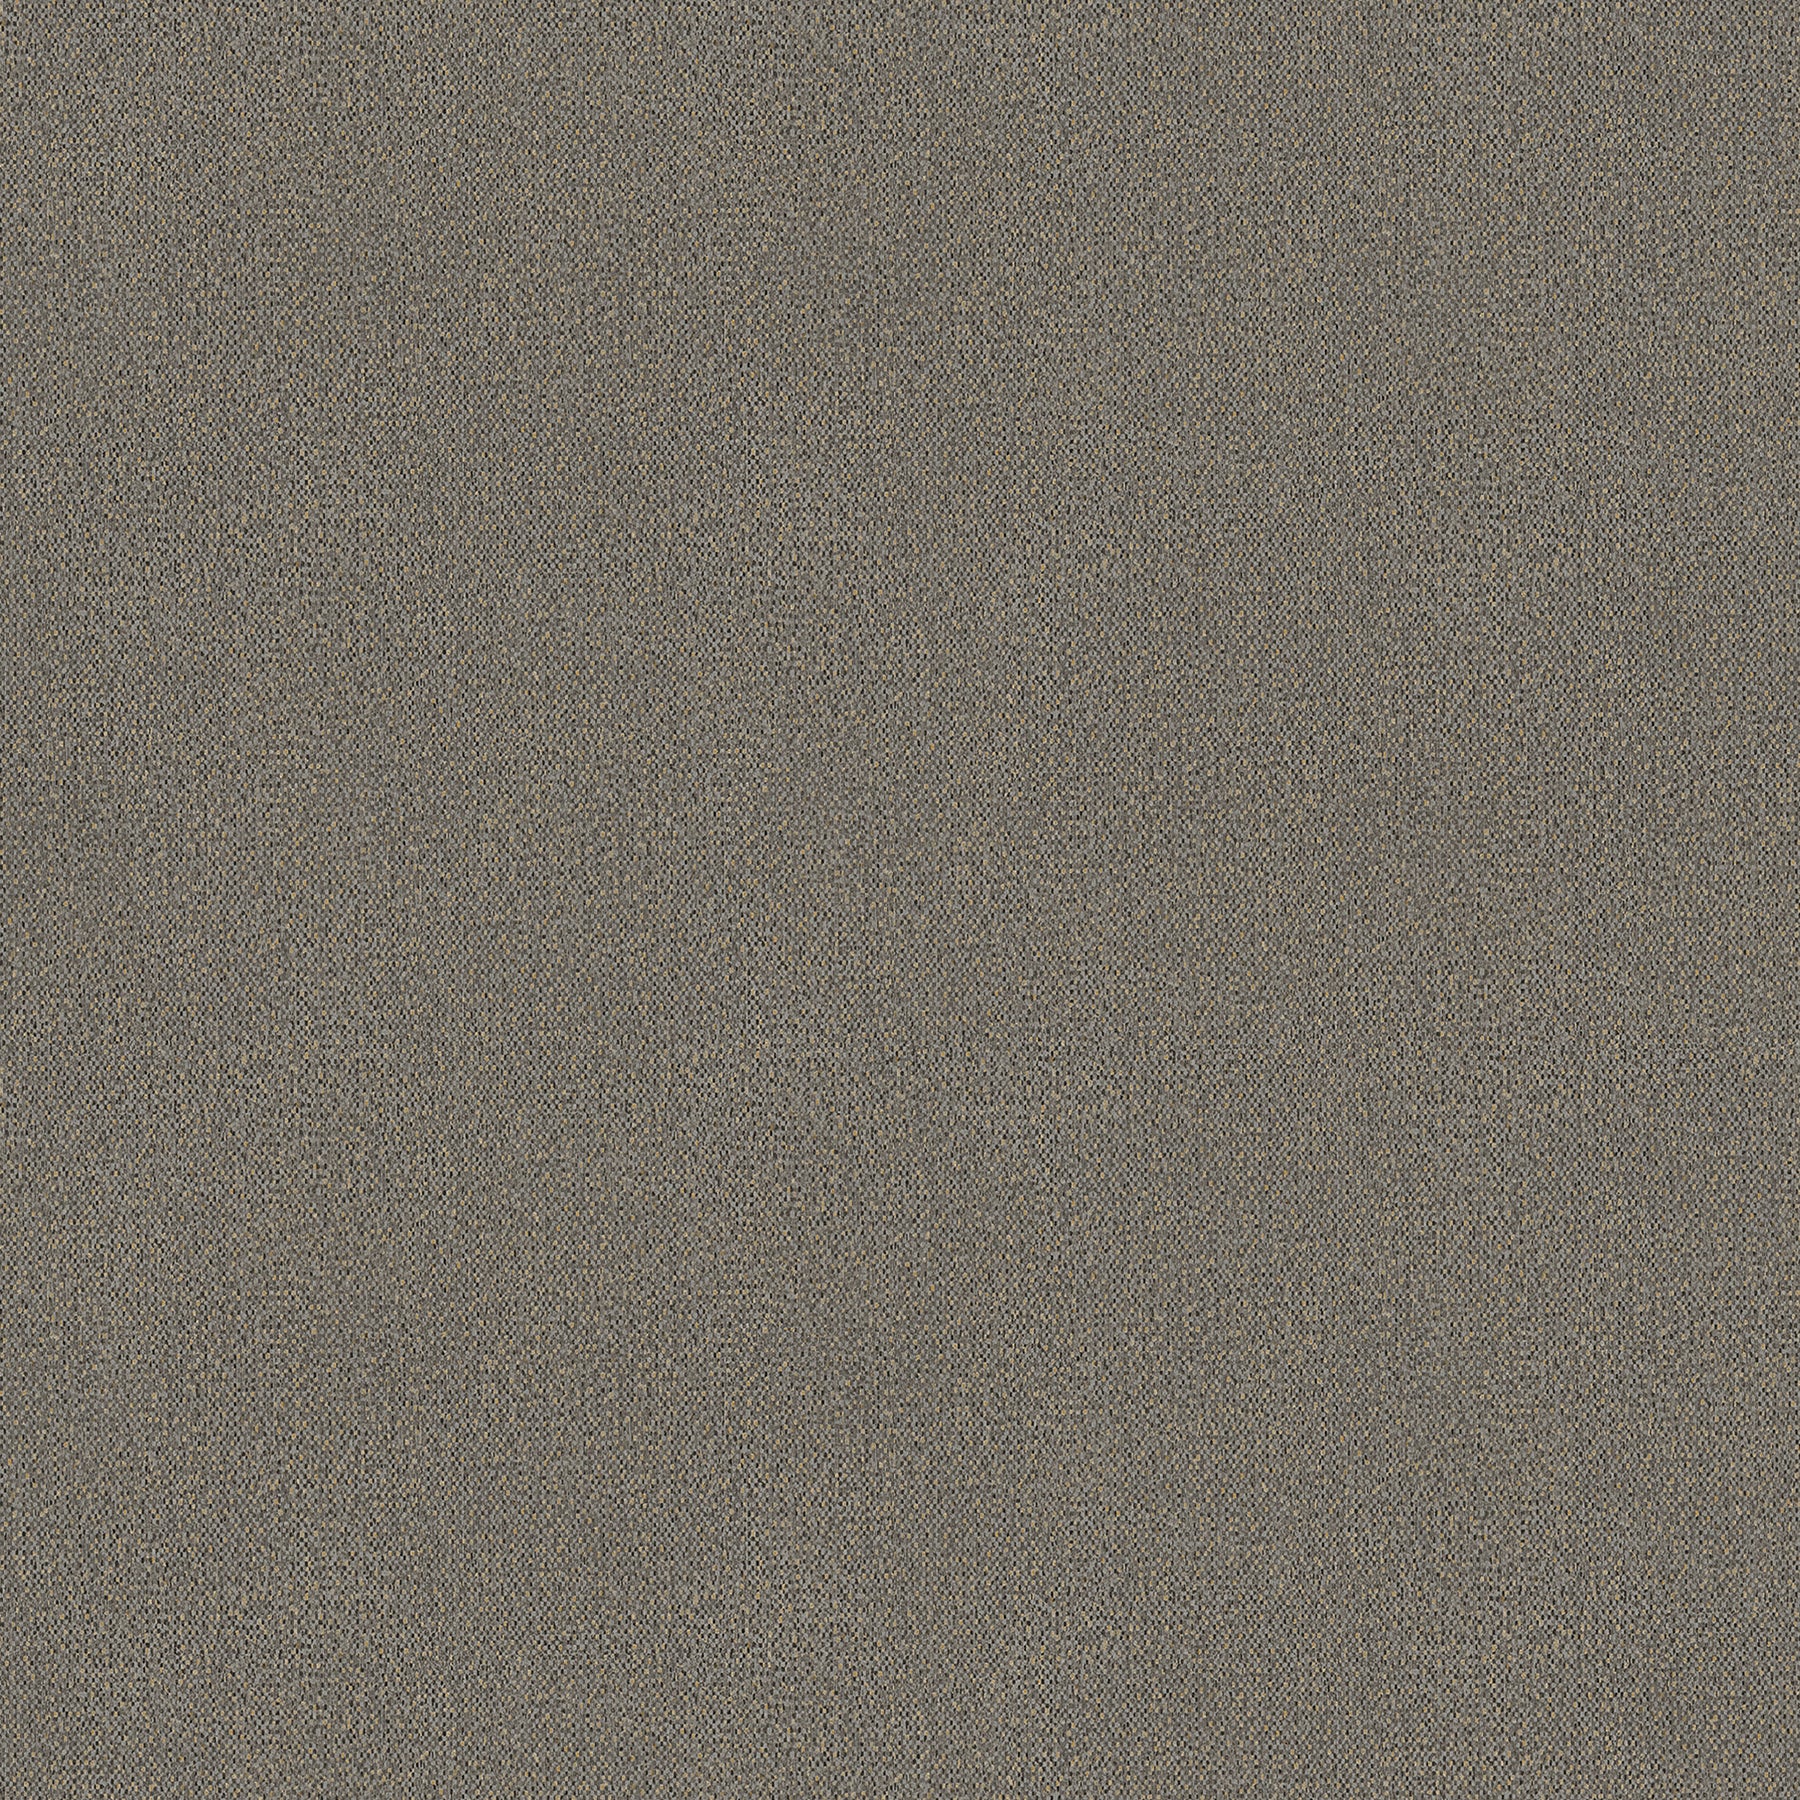 Select 2979-37374-1 Bali Hanalei Brown Distressed Abstract Texture Brown by Advantage Wallpaper